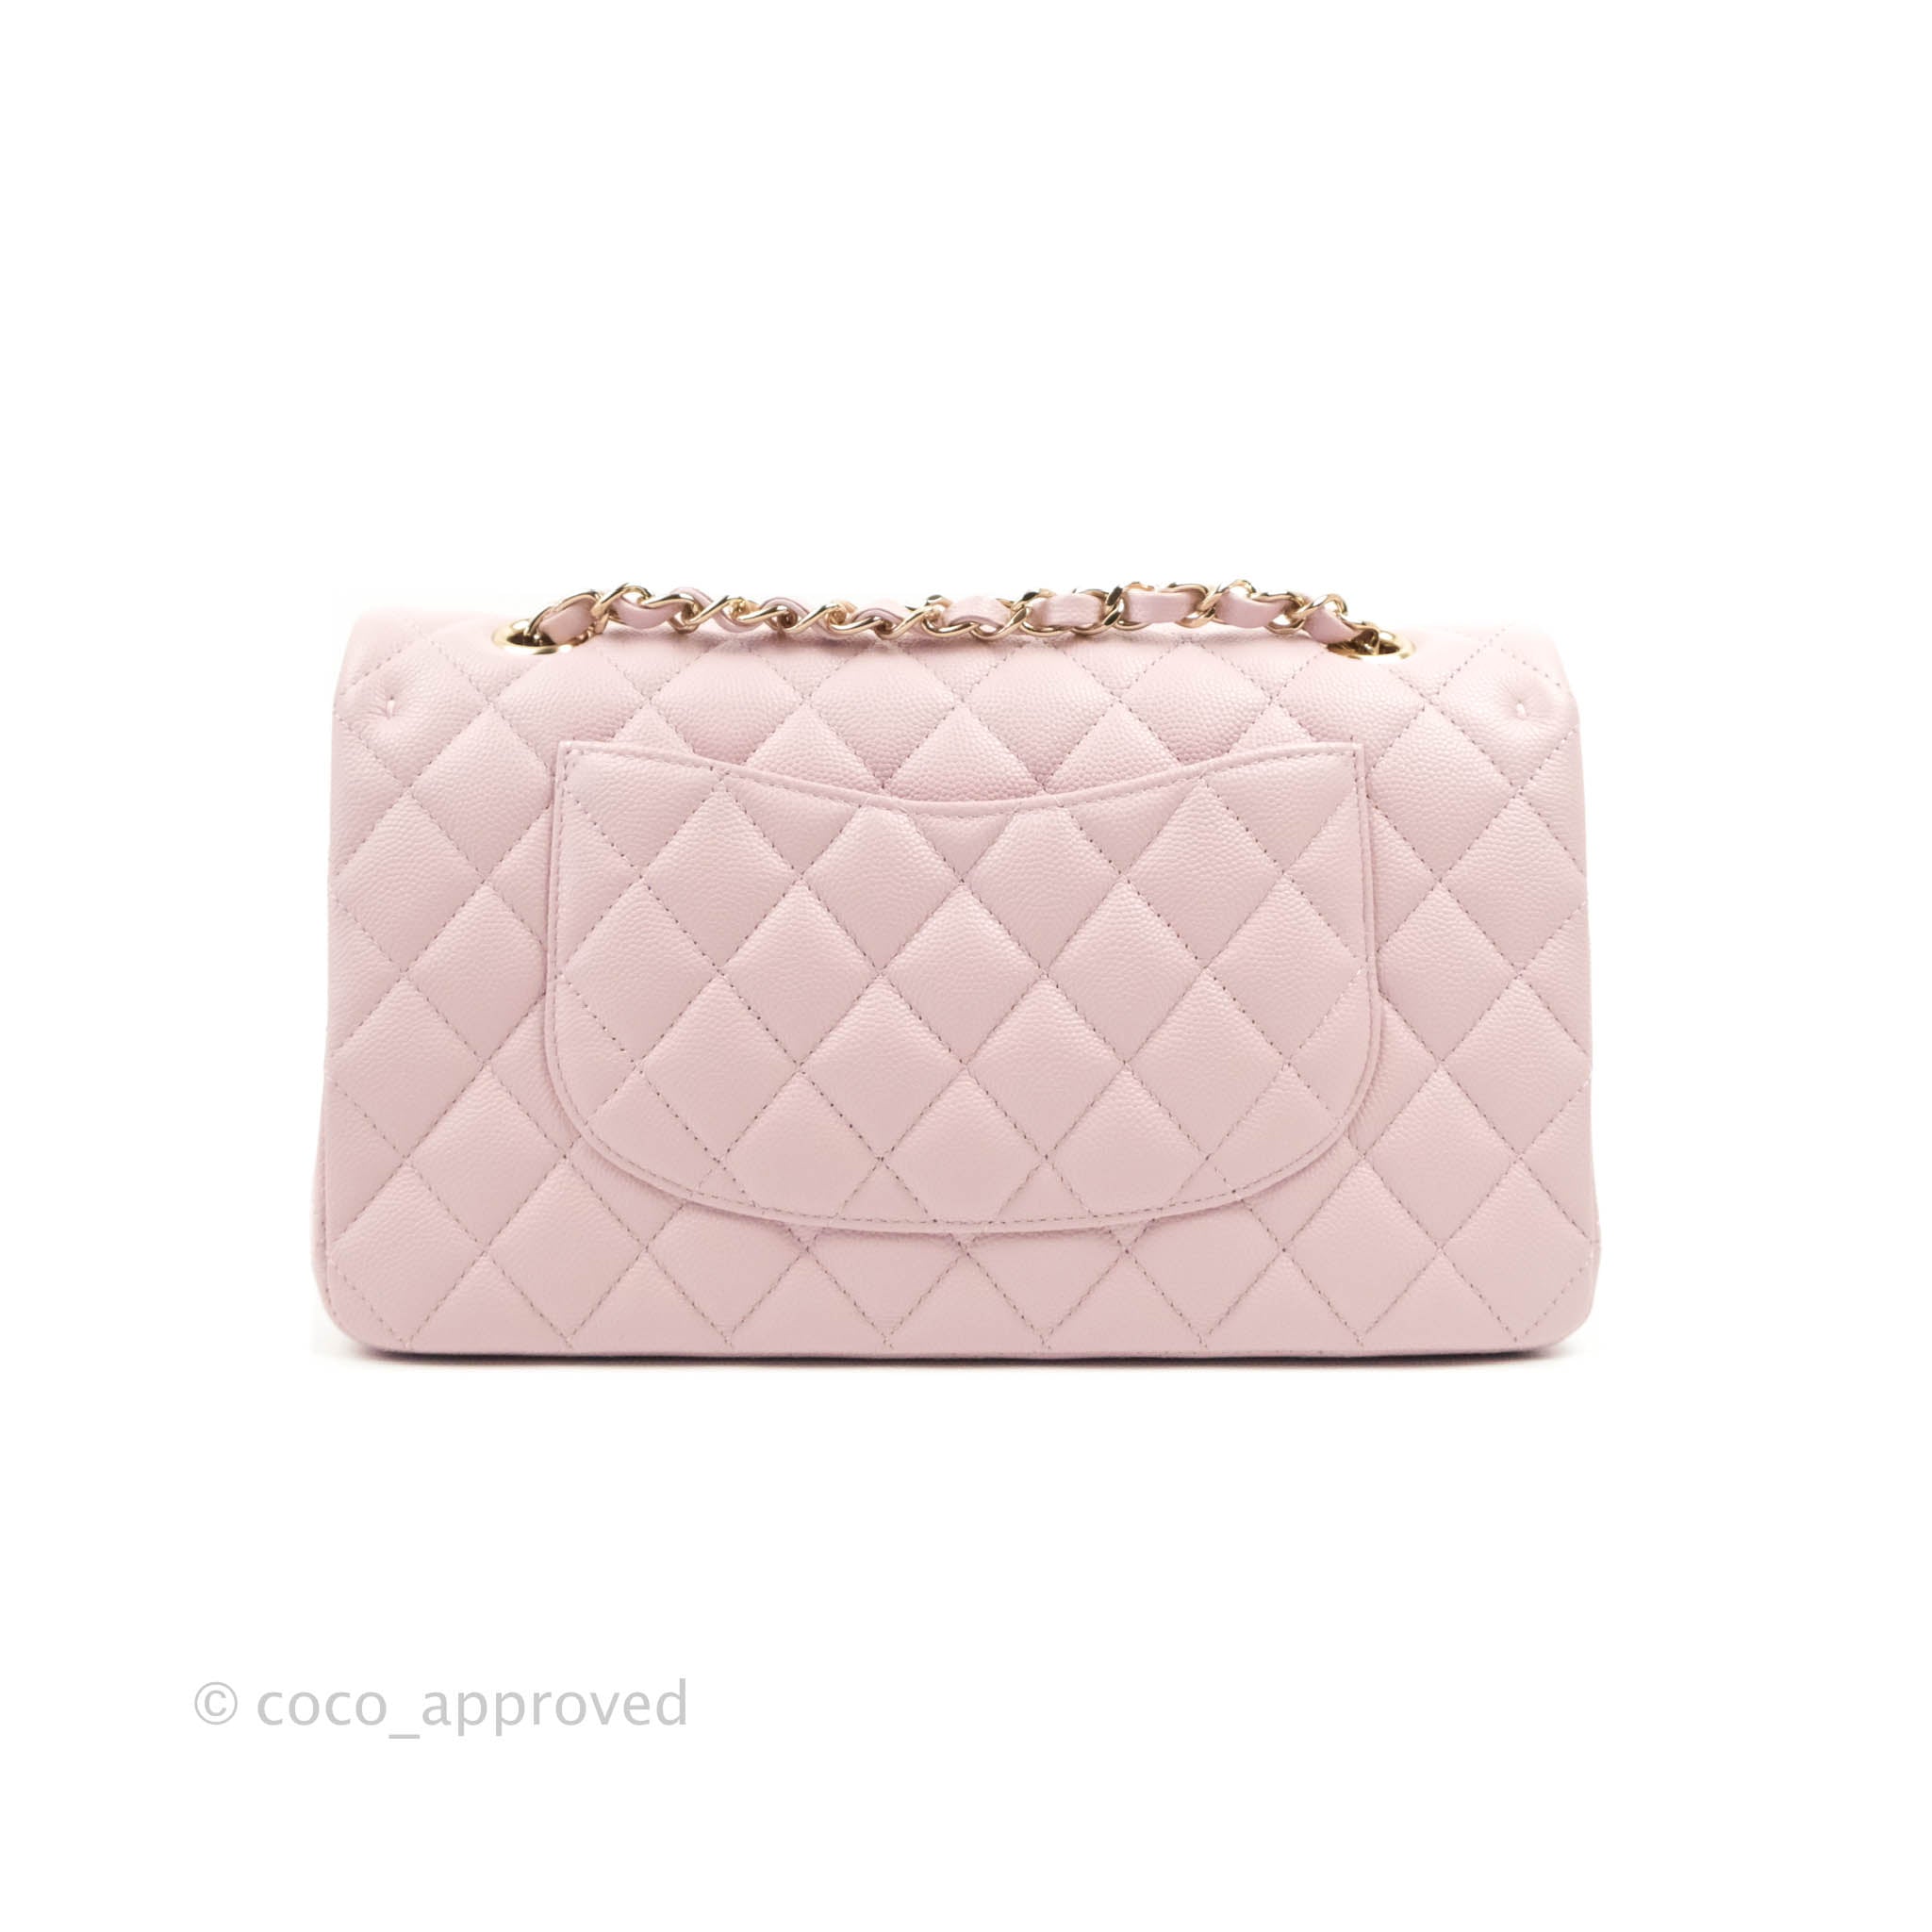 Chanel Classic Pink Bubblegum Lambskin Double Flap Bag with Gold